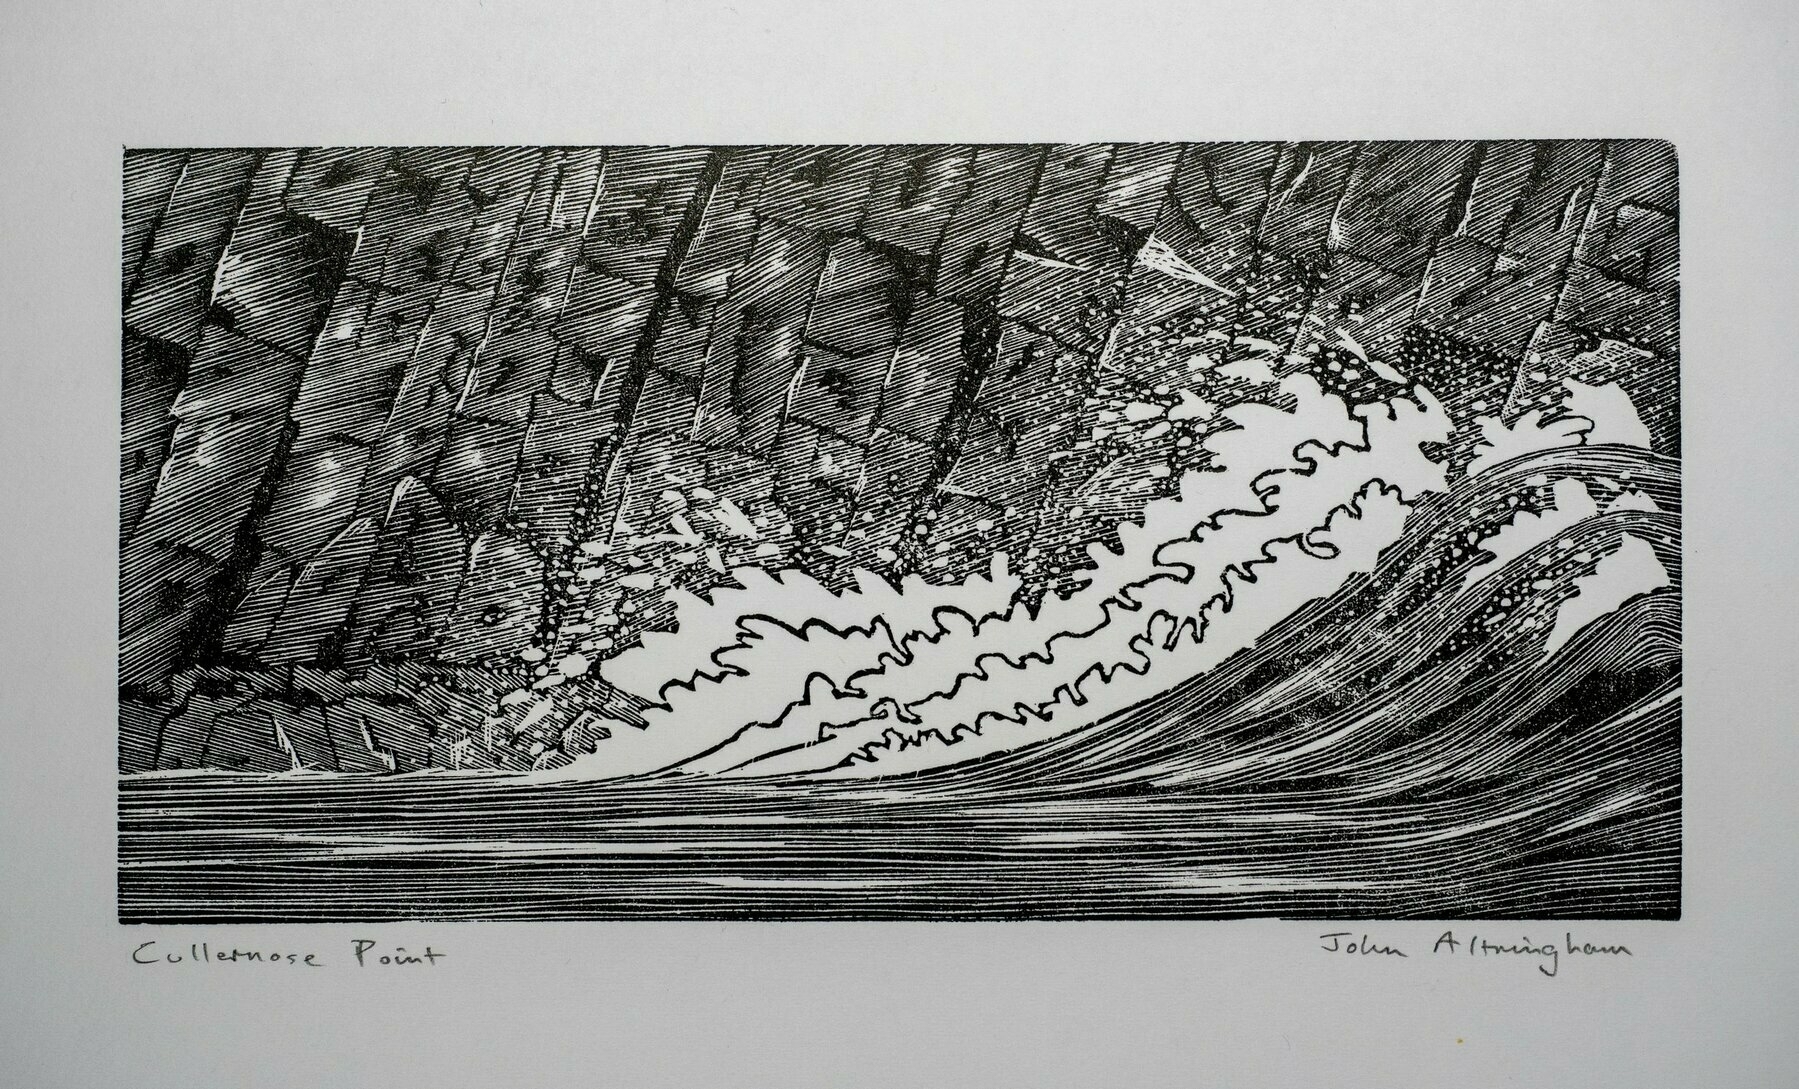 A black and white artwork depicts a dynamic and textured wave, giving off an impressionist or woodblock print style, signed at the bottom by the artist.